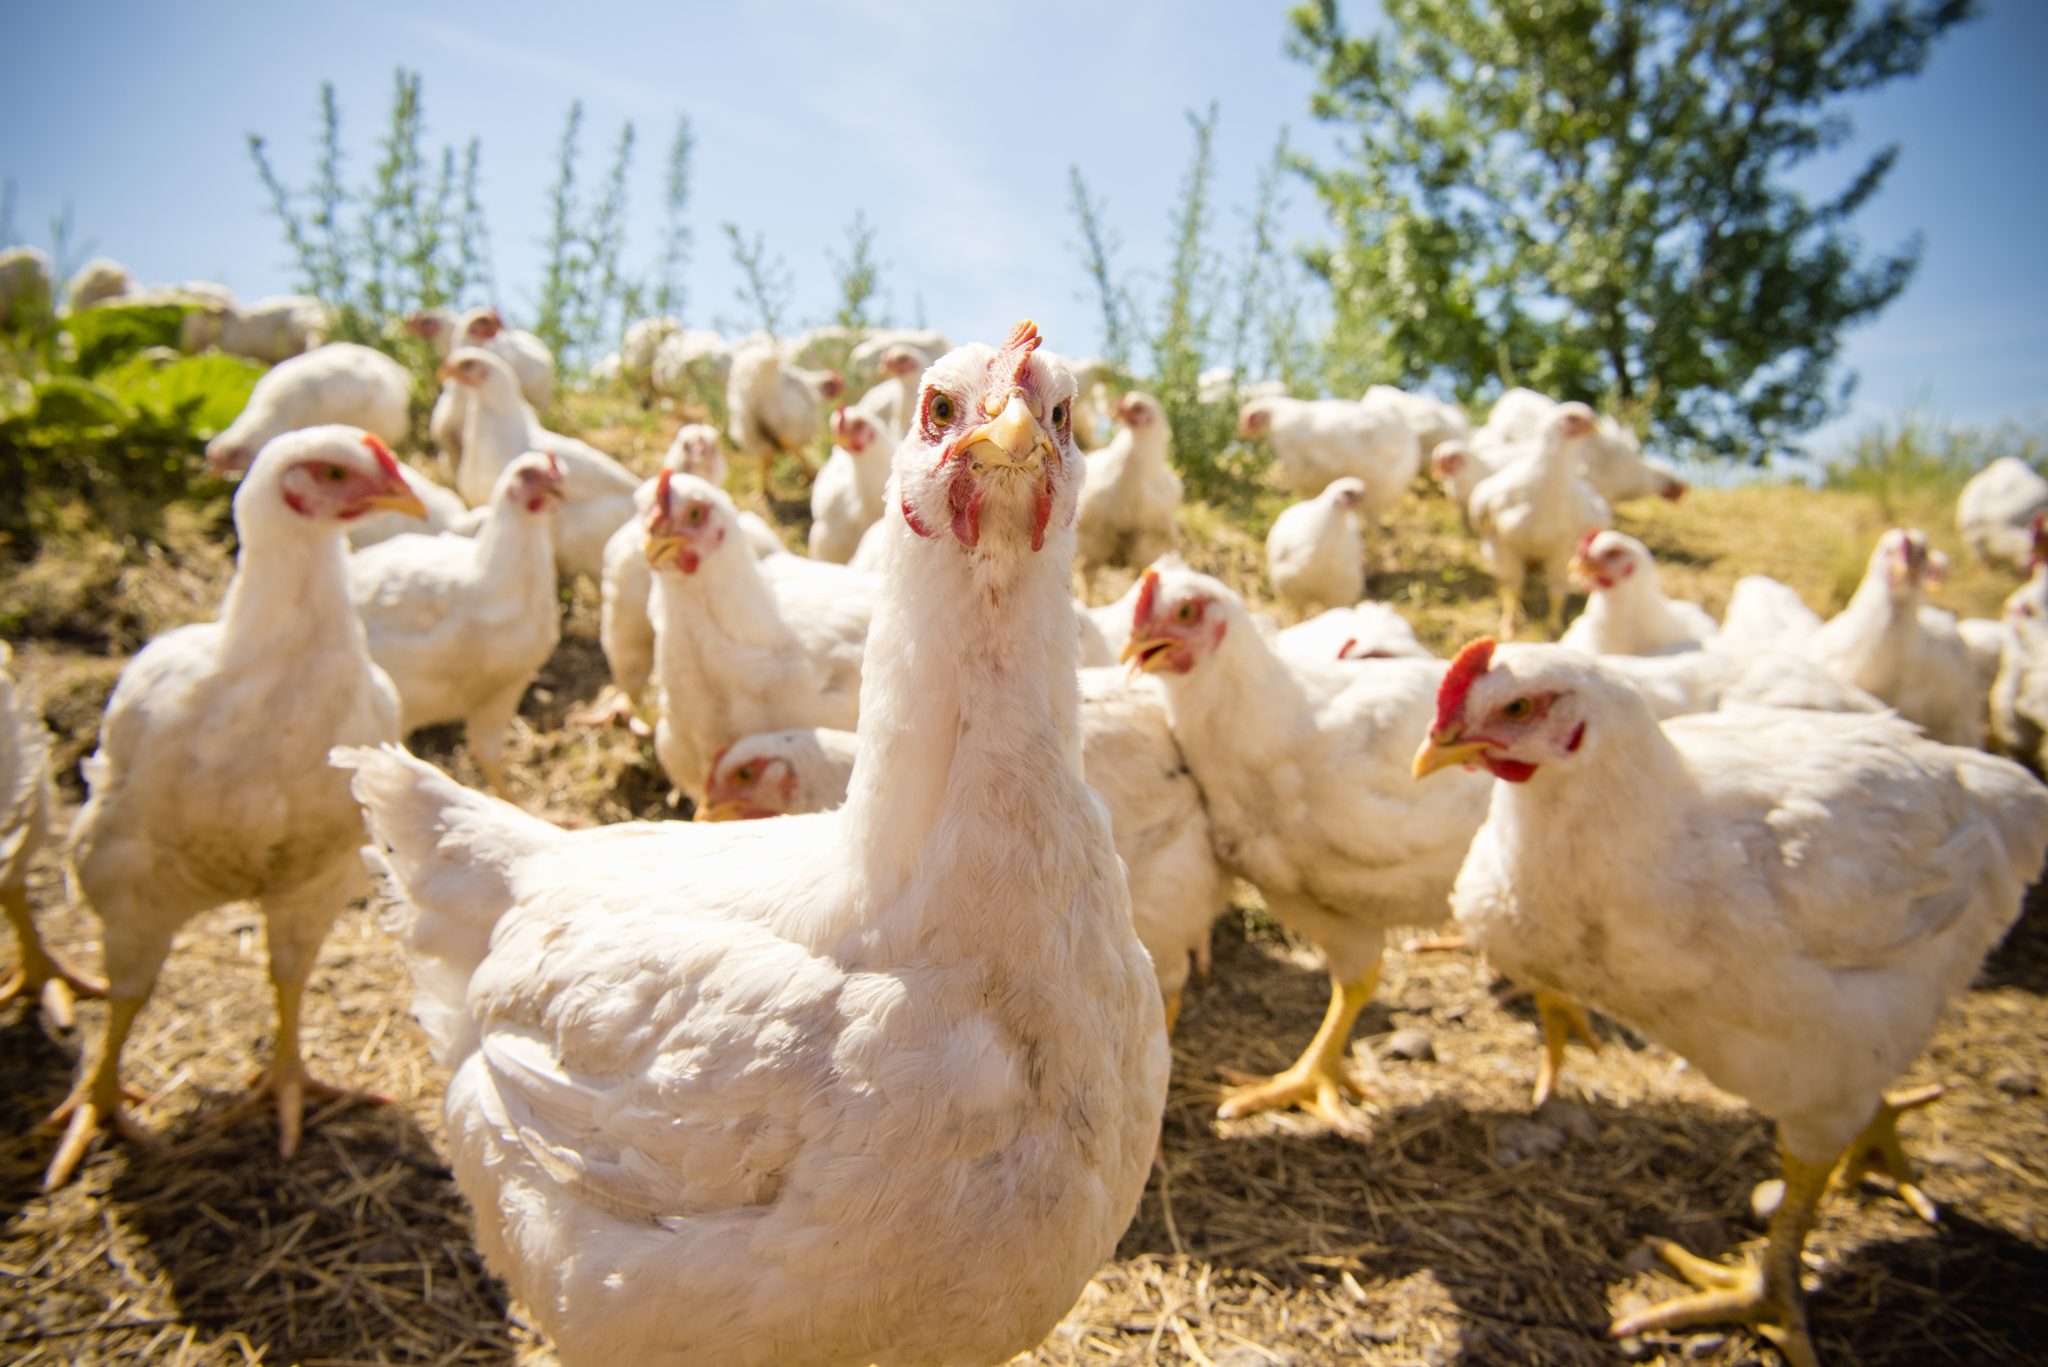 Rodent Control in and Around Backyard Chicken Coops - Pests in the Urban  Landscape - ANR Blogs